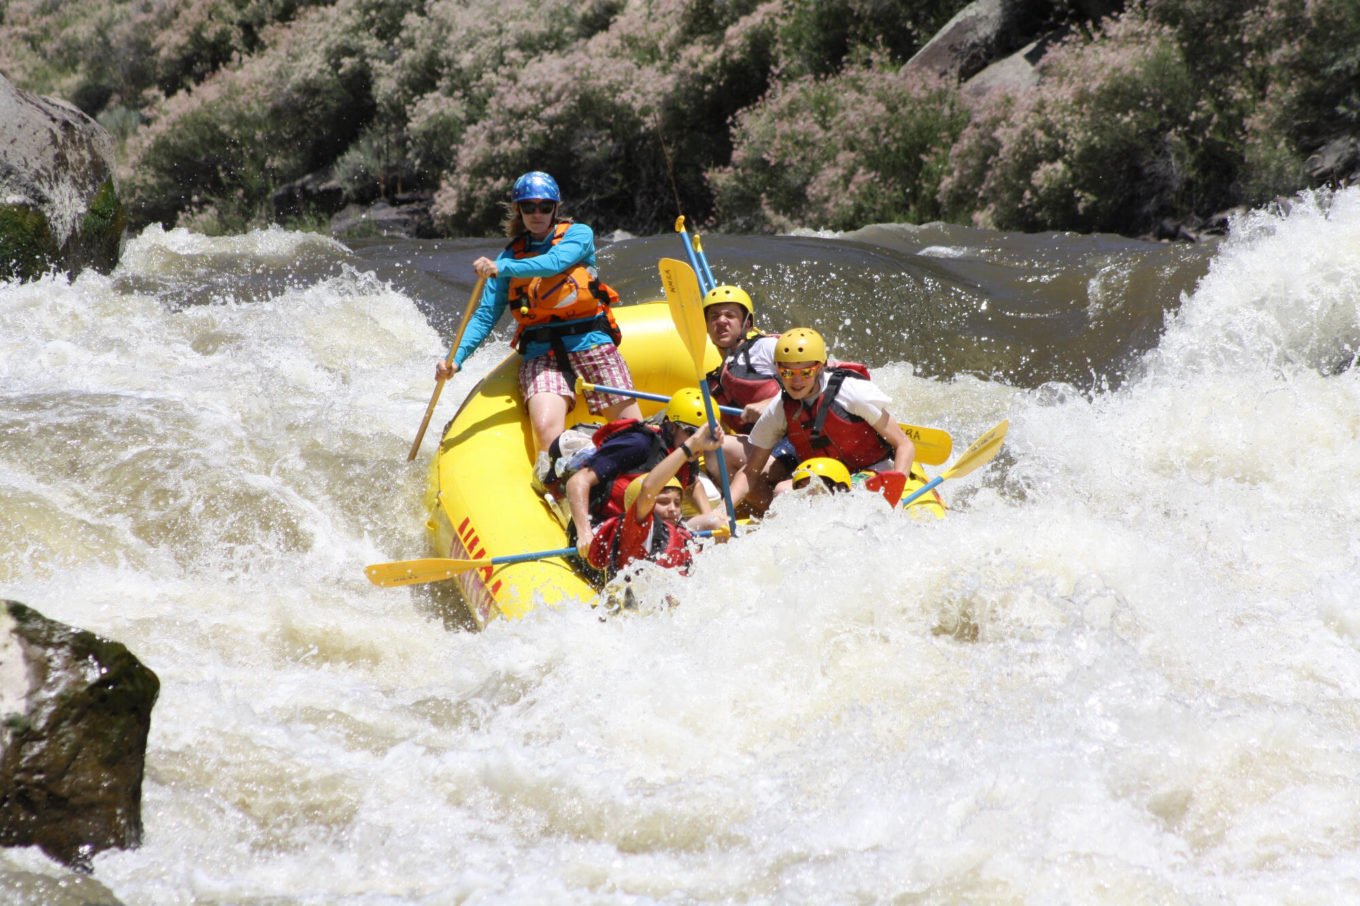 Rafting - New Mexico Tourism - Whitewater Rafting Trips